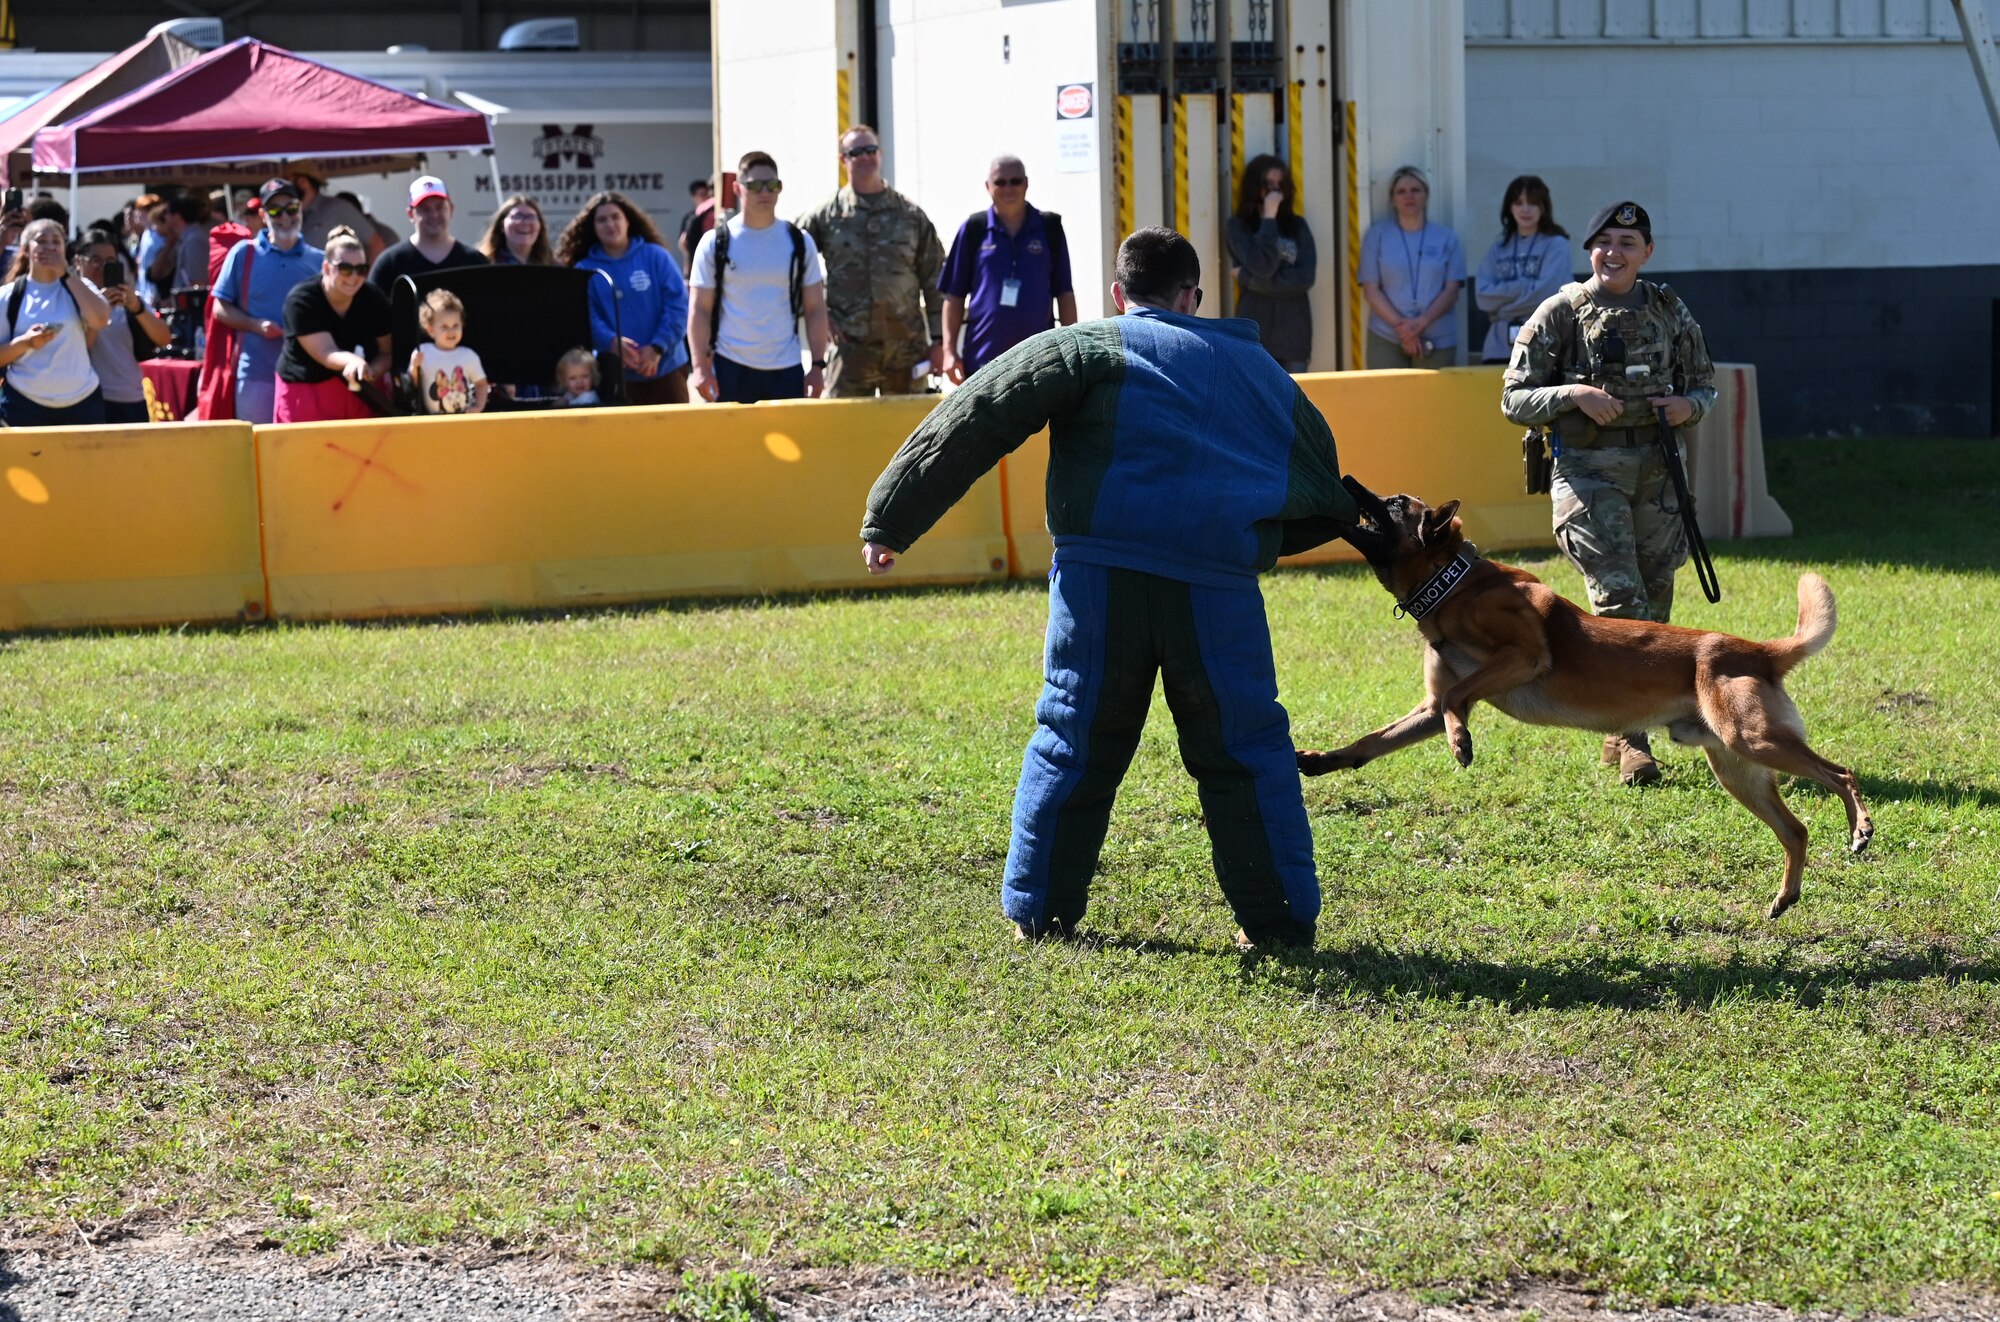 U.S. Air Force Staff Sgts. Dustin Hadsock and Ryan Wood, 81st Security Forces Squadron military working dog handlers, and Victor, 81st SFS MWD, participate in a MWD demonstration at the STEM Expo on Keesler Air Force Base, Mississippi, April 28, 2023. The Science, Technology, Engineering, and Math Expo was an educational opportunity for student to learn about career opportunities in the Air Force and on the Gulf Coast. (U.S. Air Force photo by Airman 1st Class Elizabeth Davis)